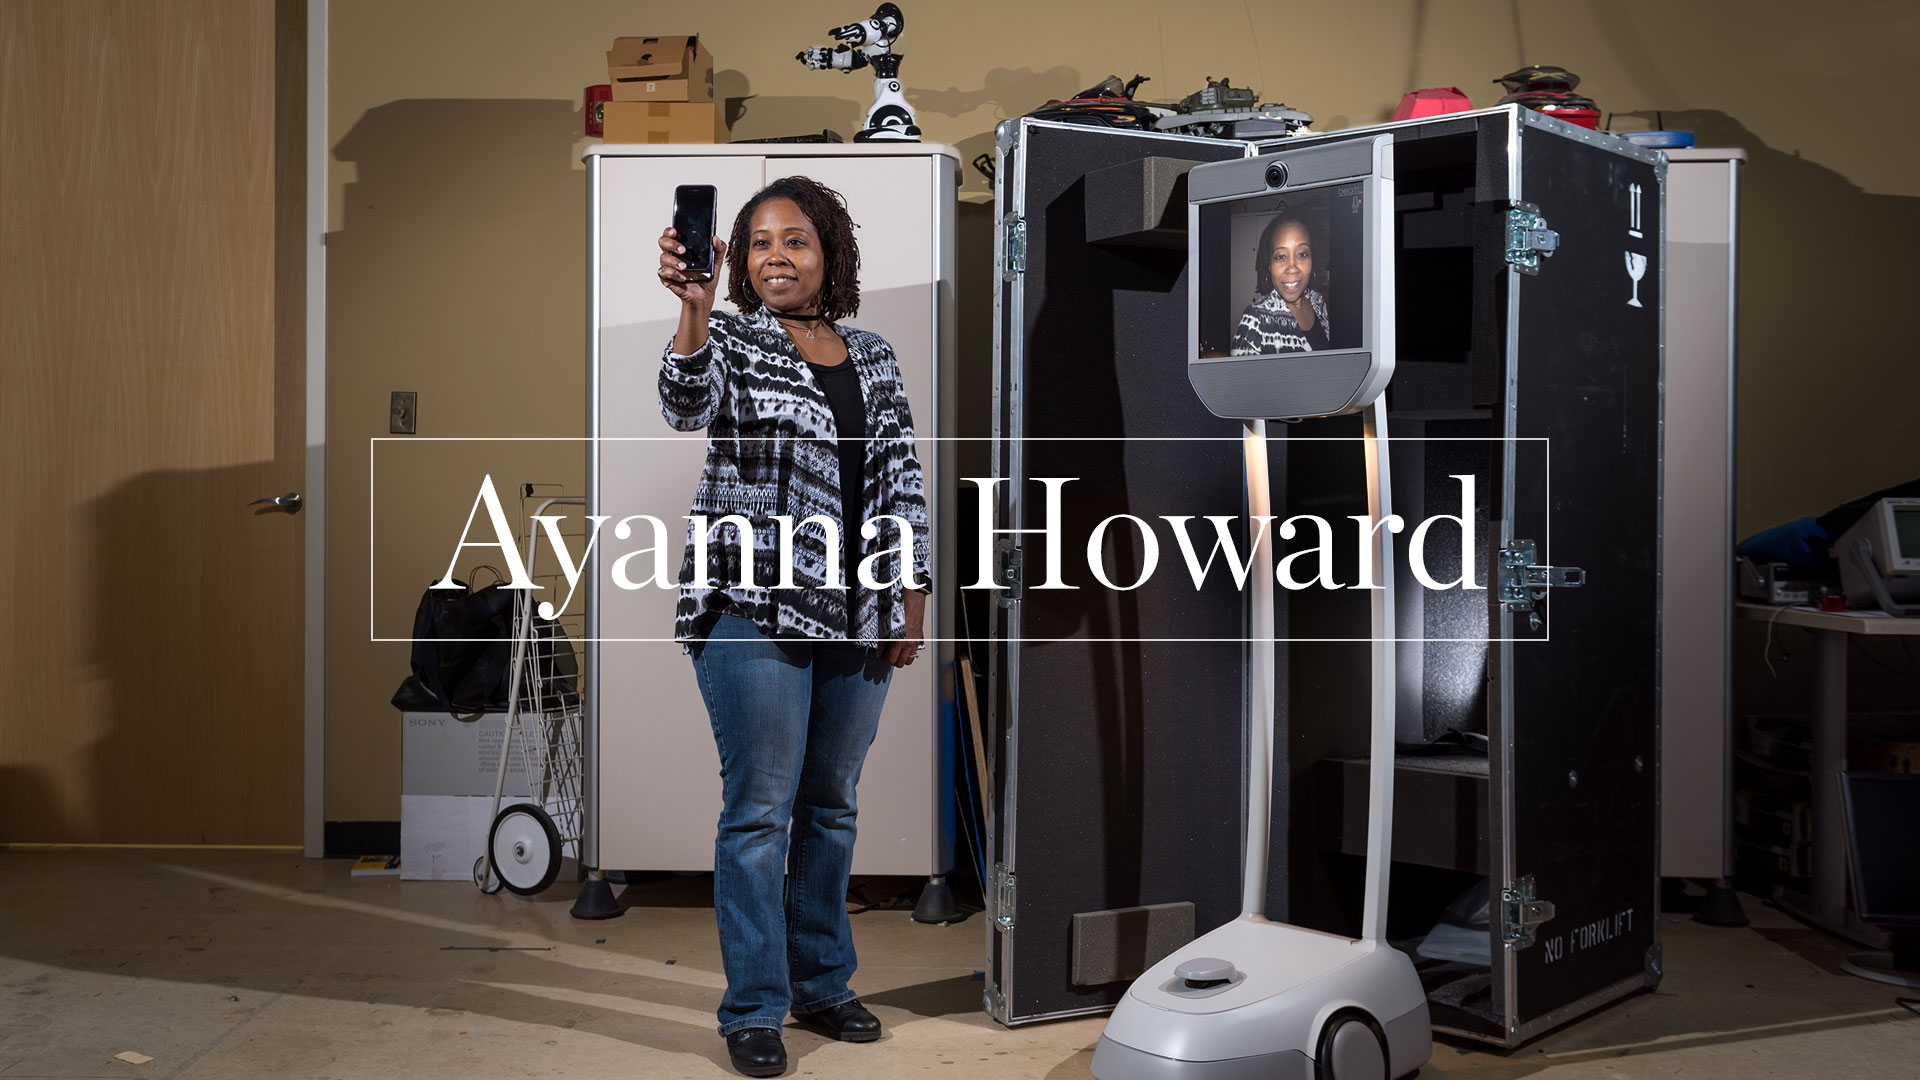 photo - Ayanna Howard holding up smartphone with her image appearing on face of robot